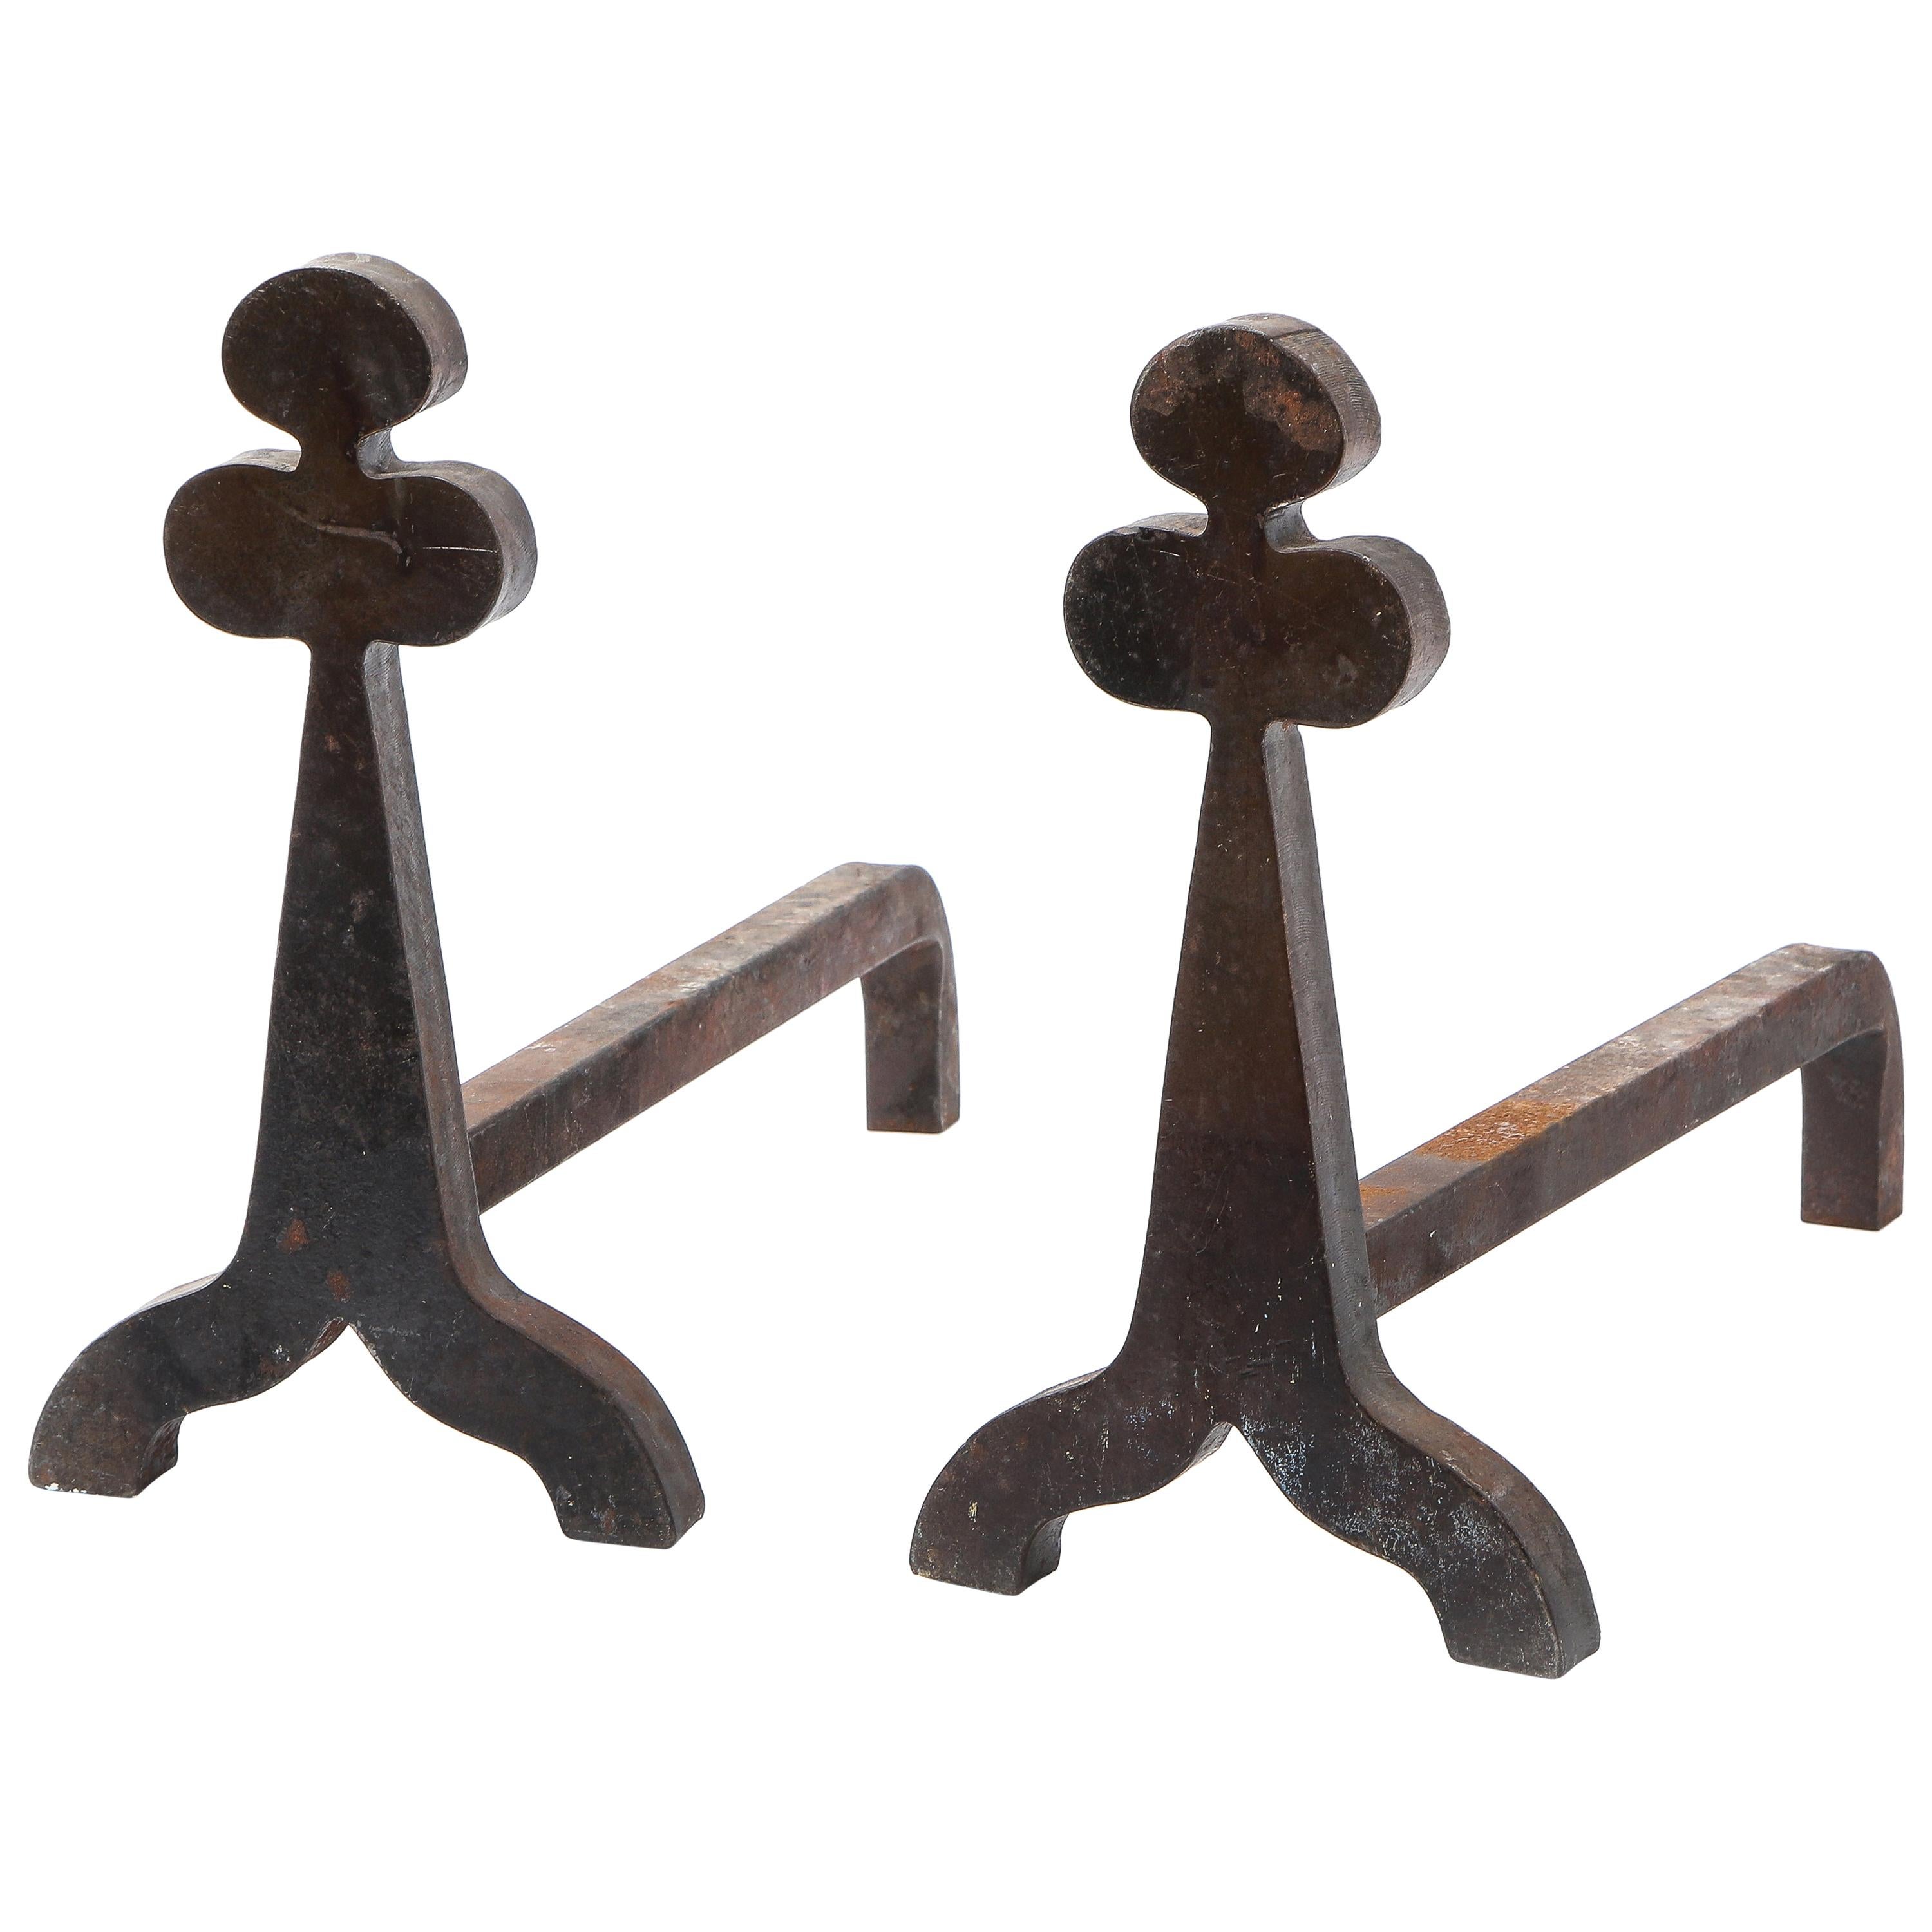 Midcentury French Three Leaf Clover Andirons in Iron